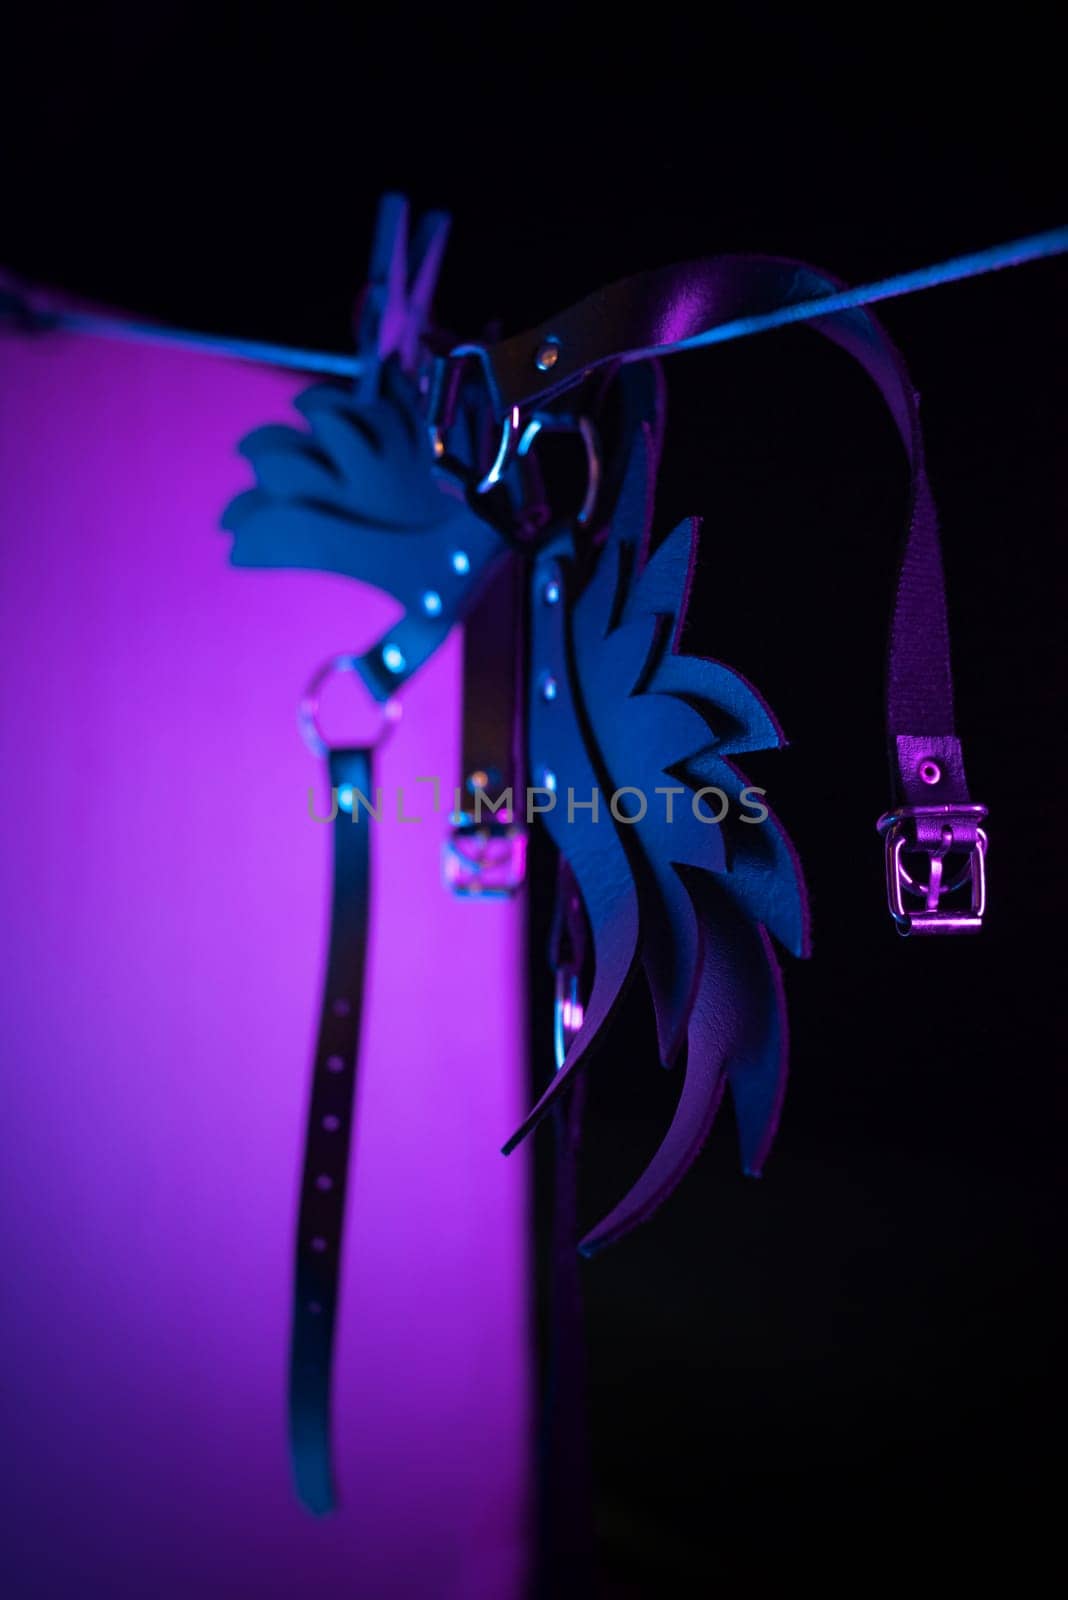 bdsm leather shoulder straps in the shape of wings hanging on a clothesline in neon light on a black background, conceptual photos by Rotozey